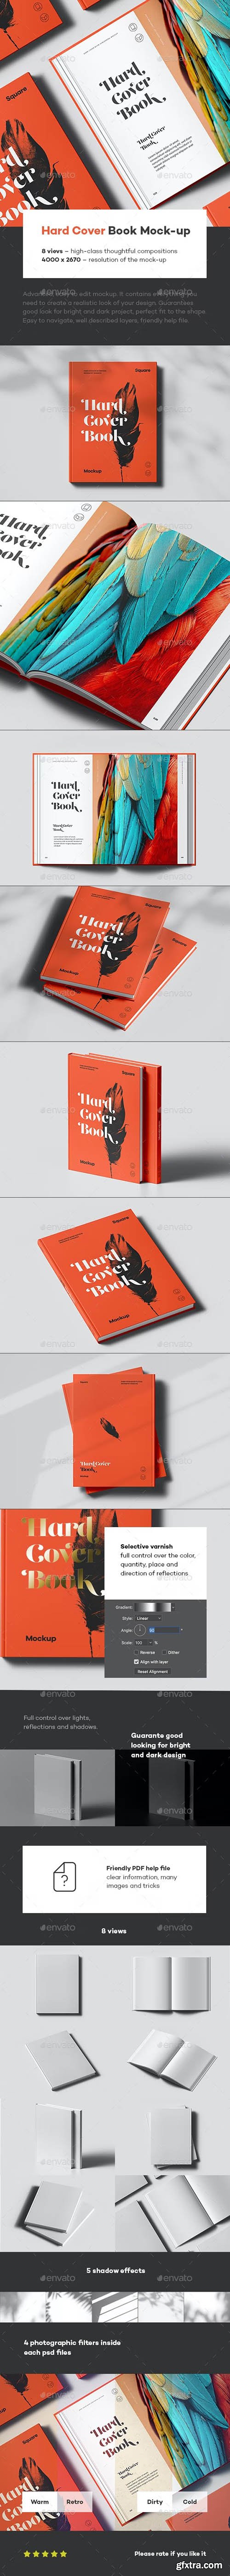 GraphicRiver - Hard Cover Vertical Book Mock-up 41808780